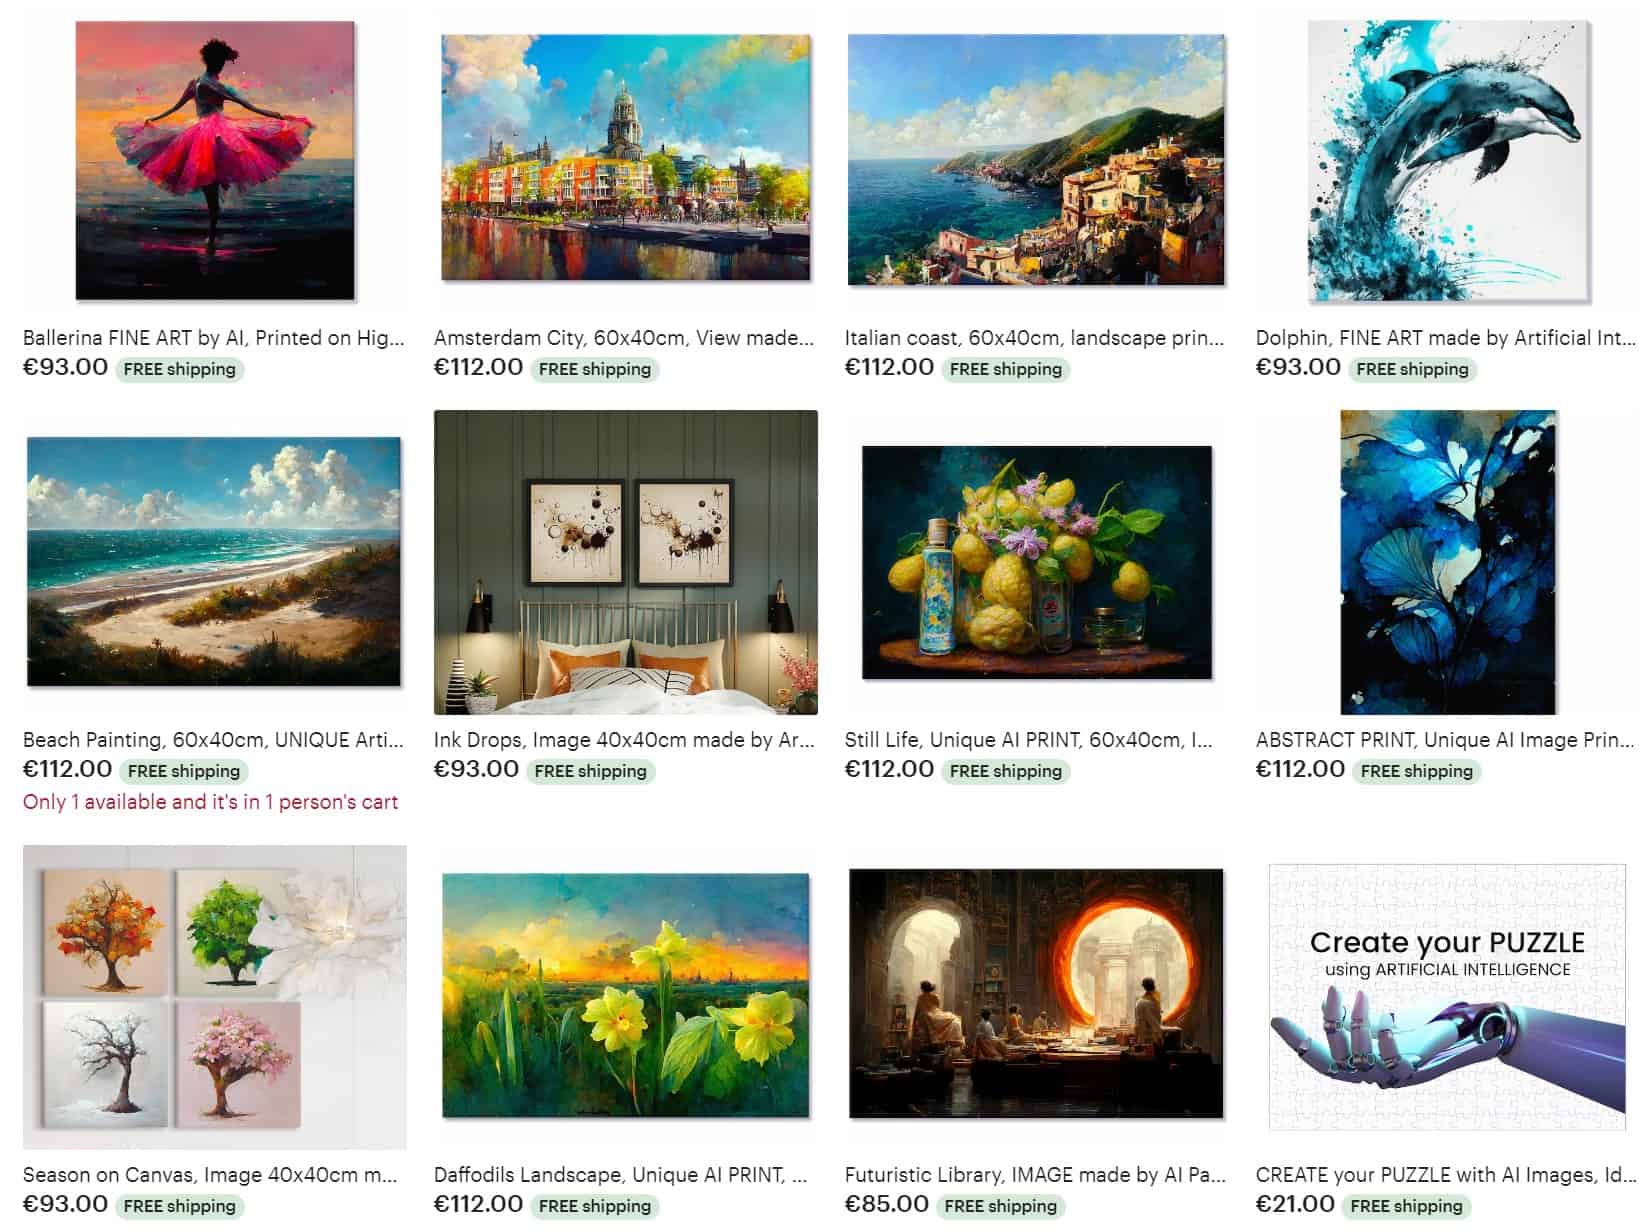 Can You Sell AI Art On Etsy? Here's What You Need to Know